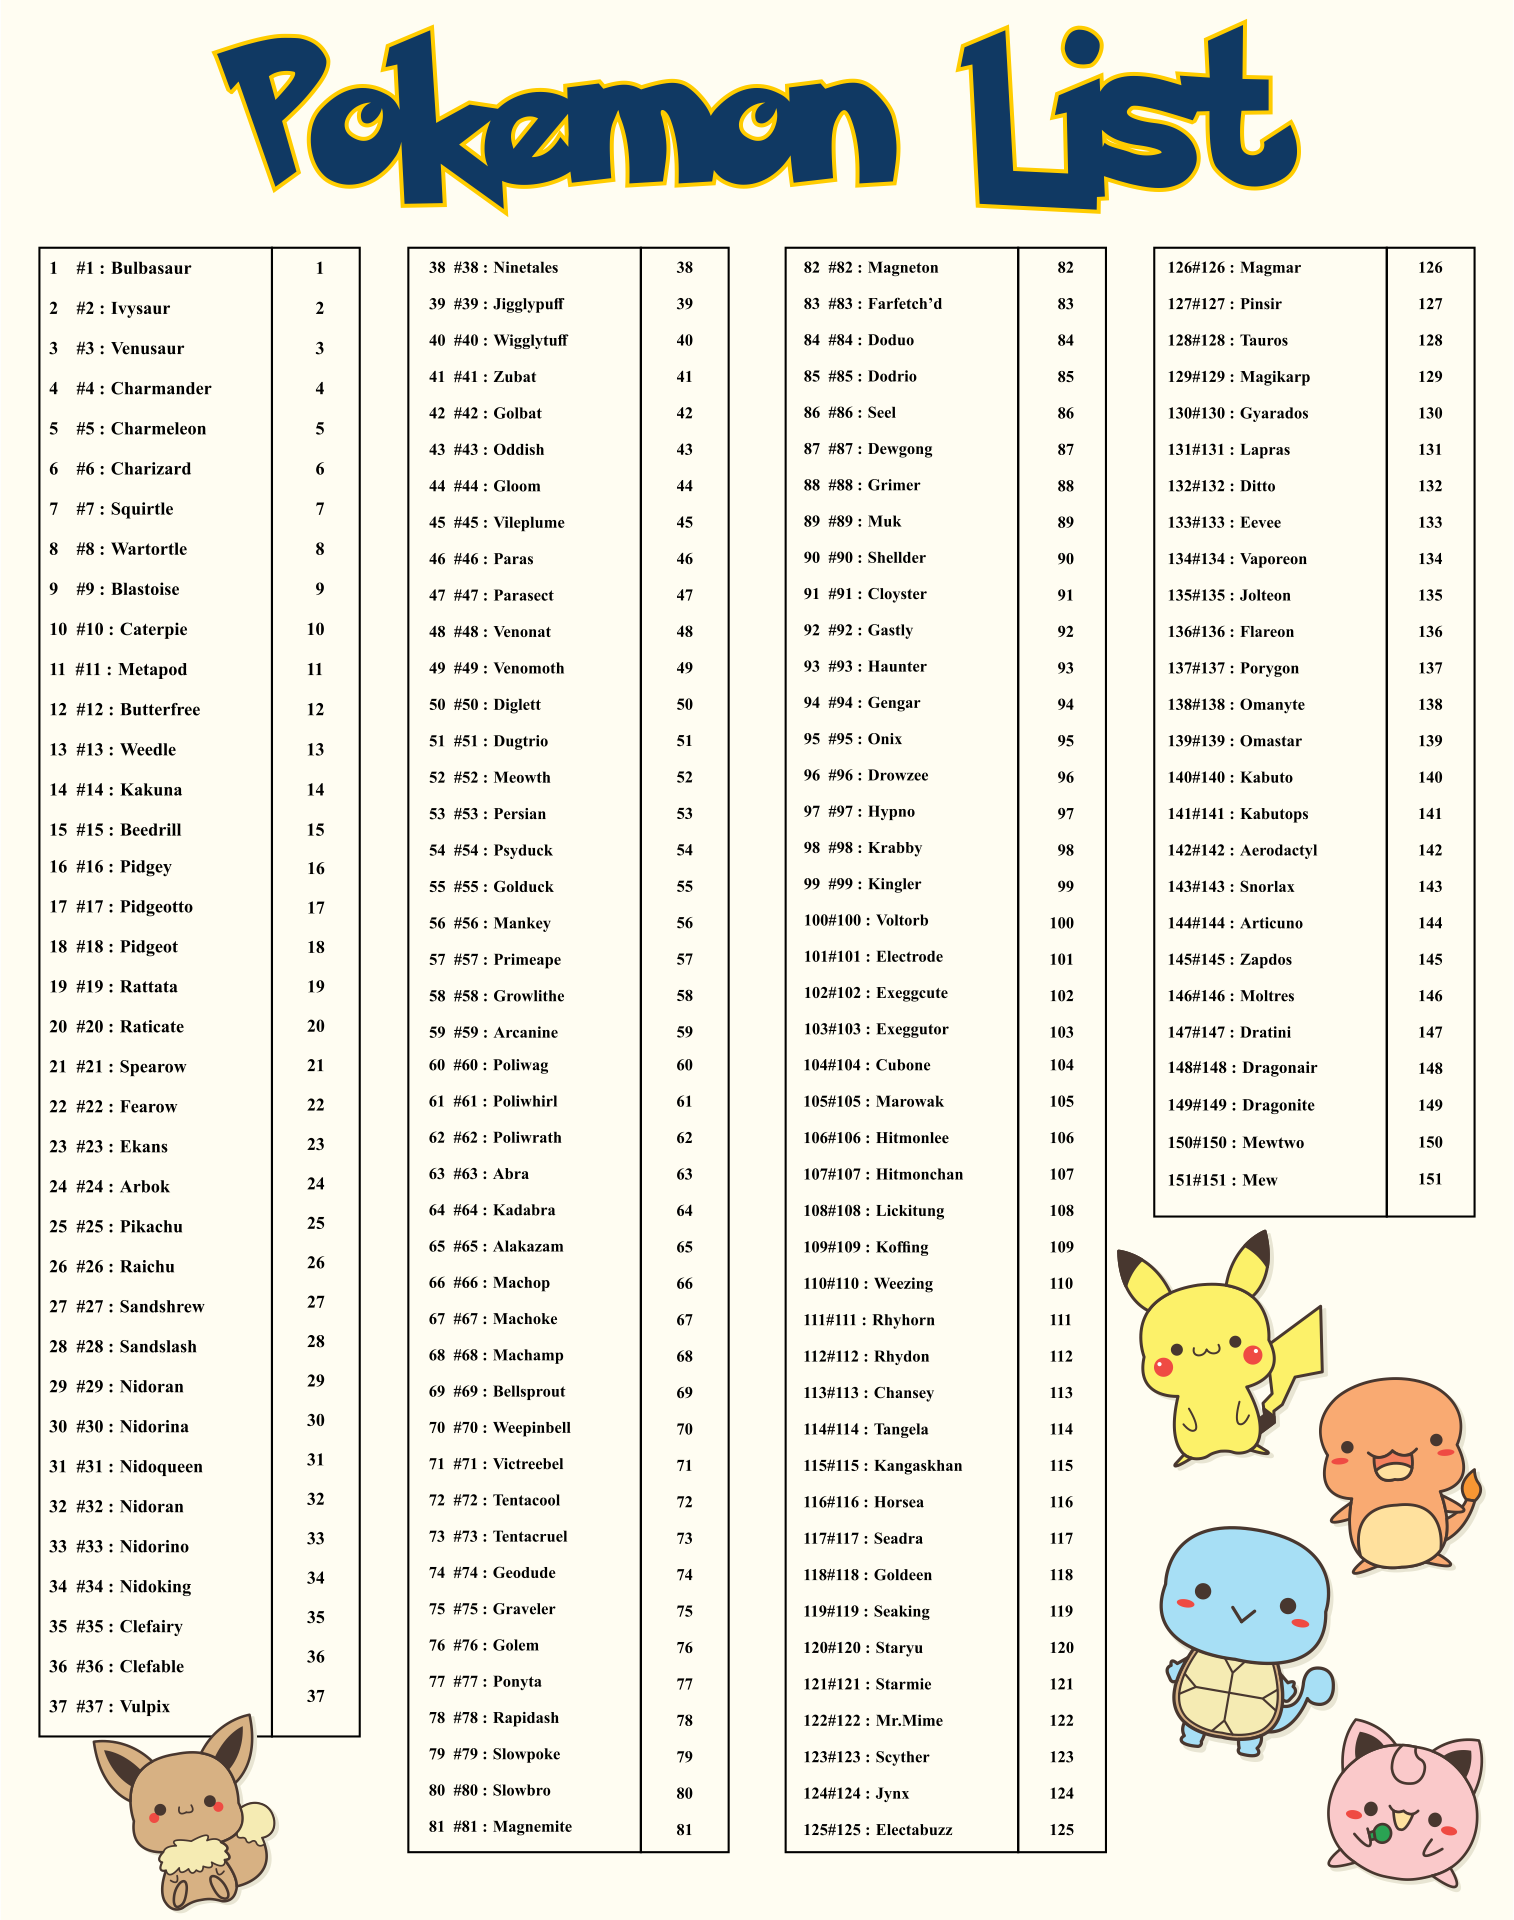 8-best-images-of-pokemon-card-checklist-printable-list-of-all-pokemon-card-checklist